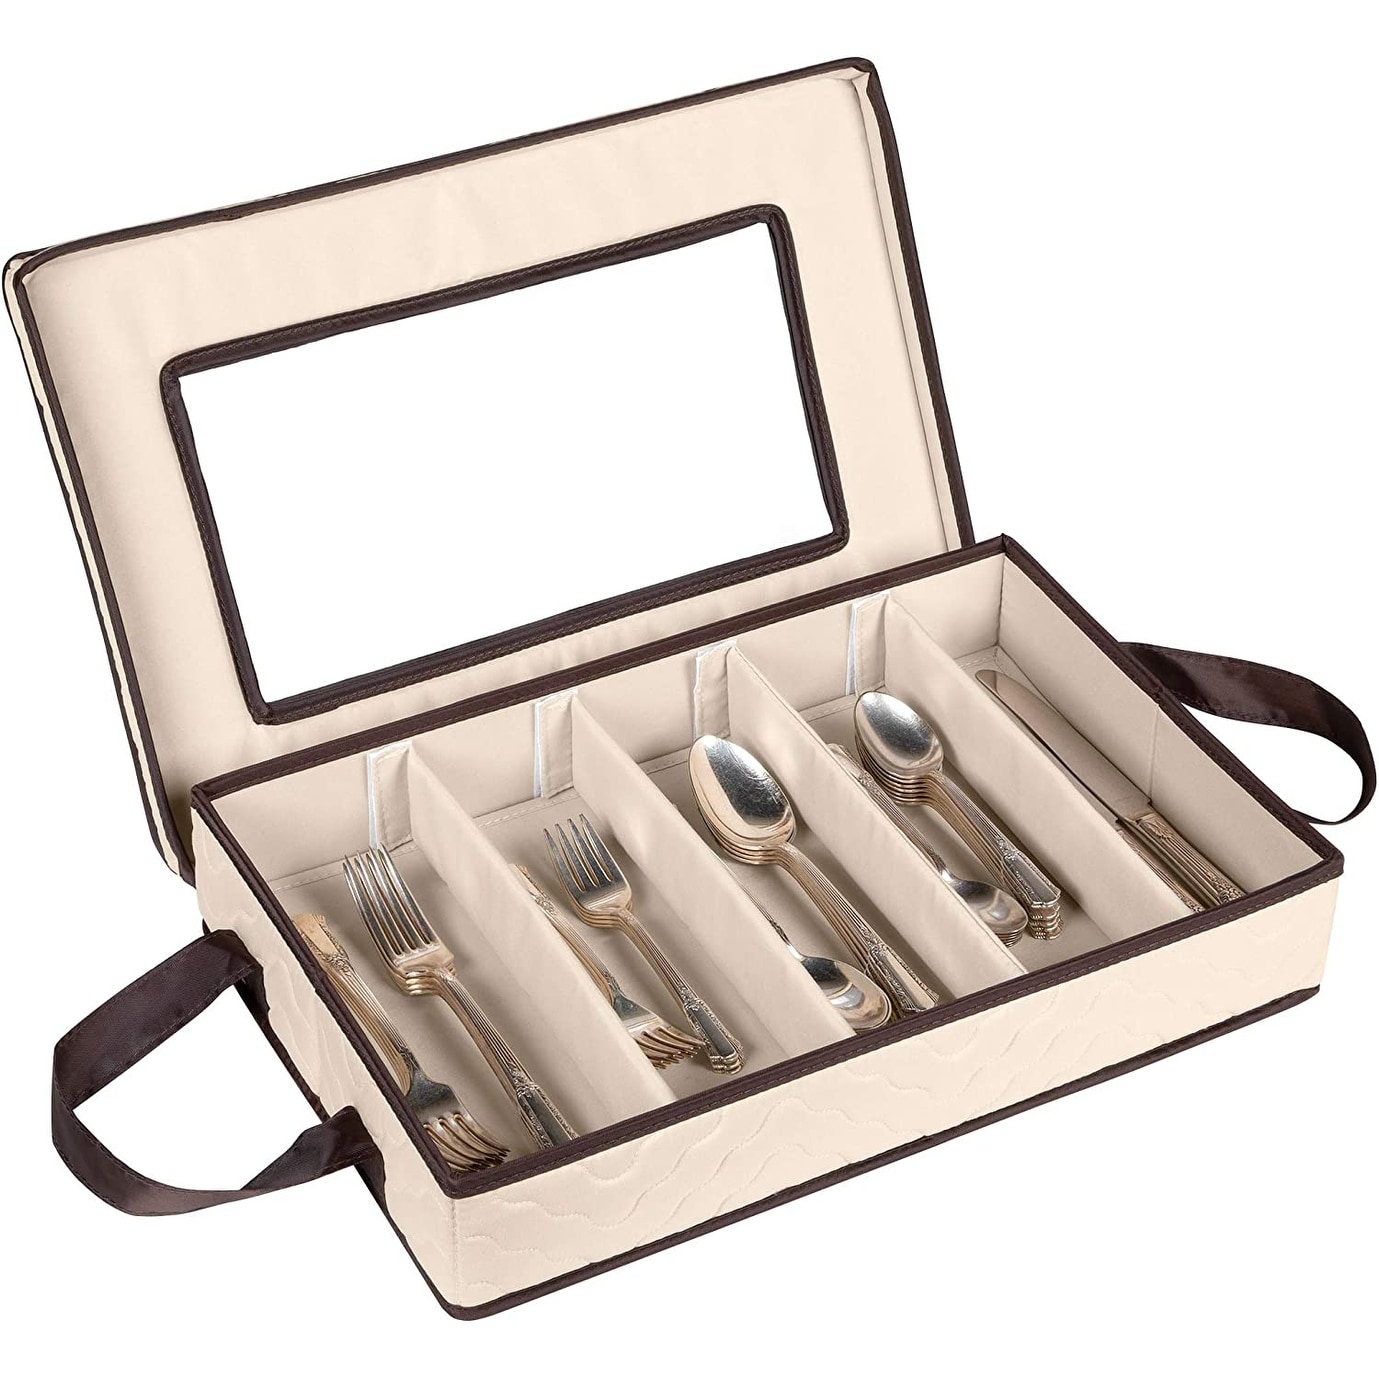 Flatware Storage Case - Tableware Utensil Chest - Durable 5 Compartment Silverware Container with Removable Lid and Easy to Carry Handles - Large